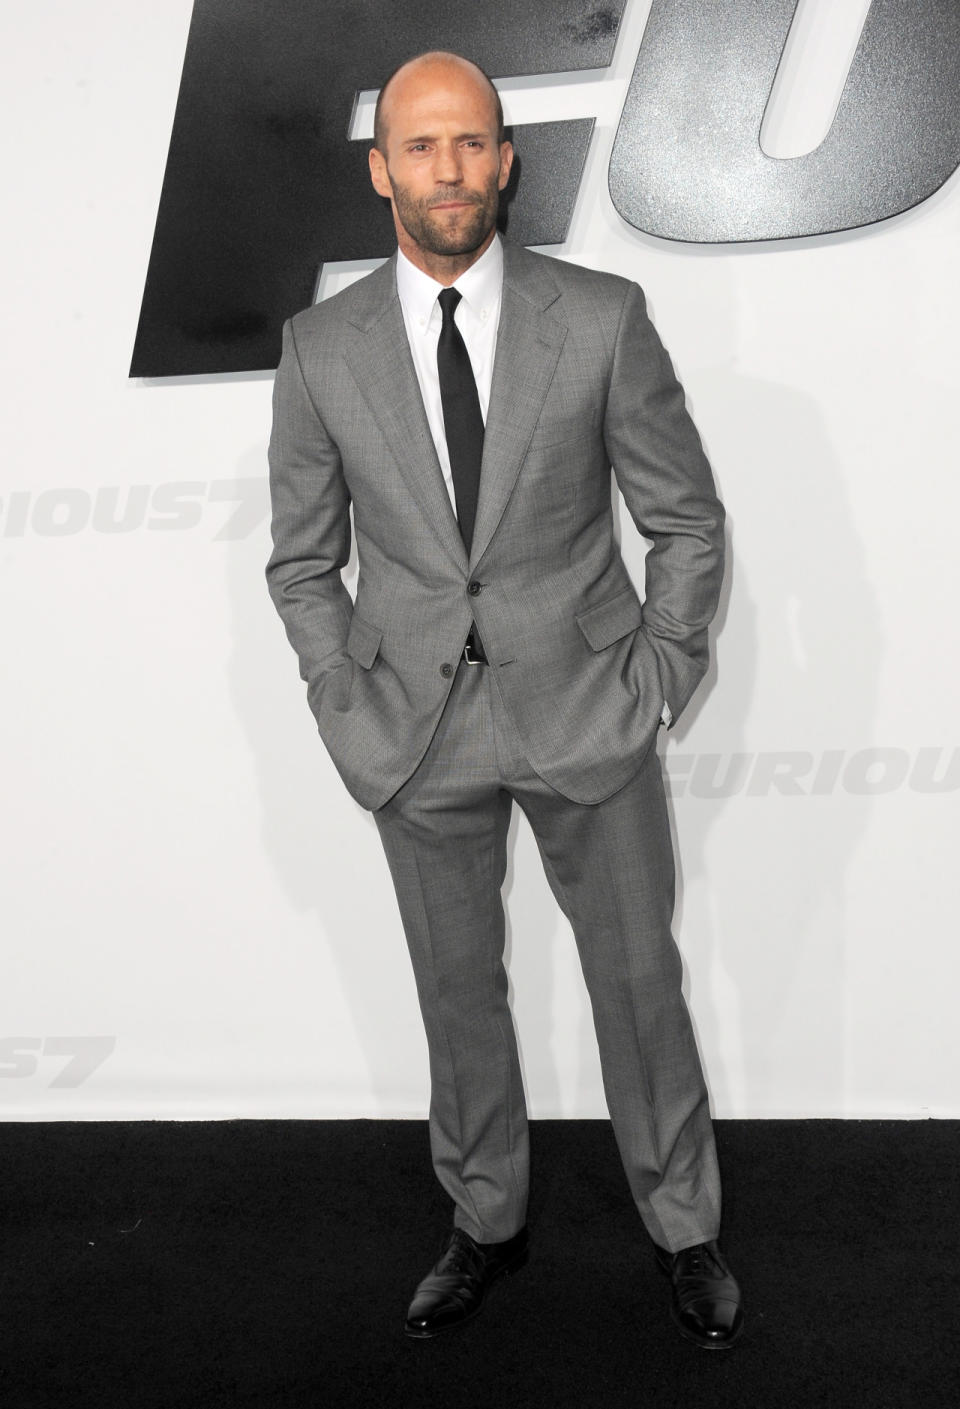 The eternal action star showed up to the “Furious 7” premiere in a gray suit and black tie that would most likely get the seal of sartorial approval from his lady love Rosie Huntington-Whiteley.